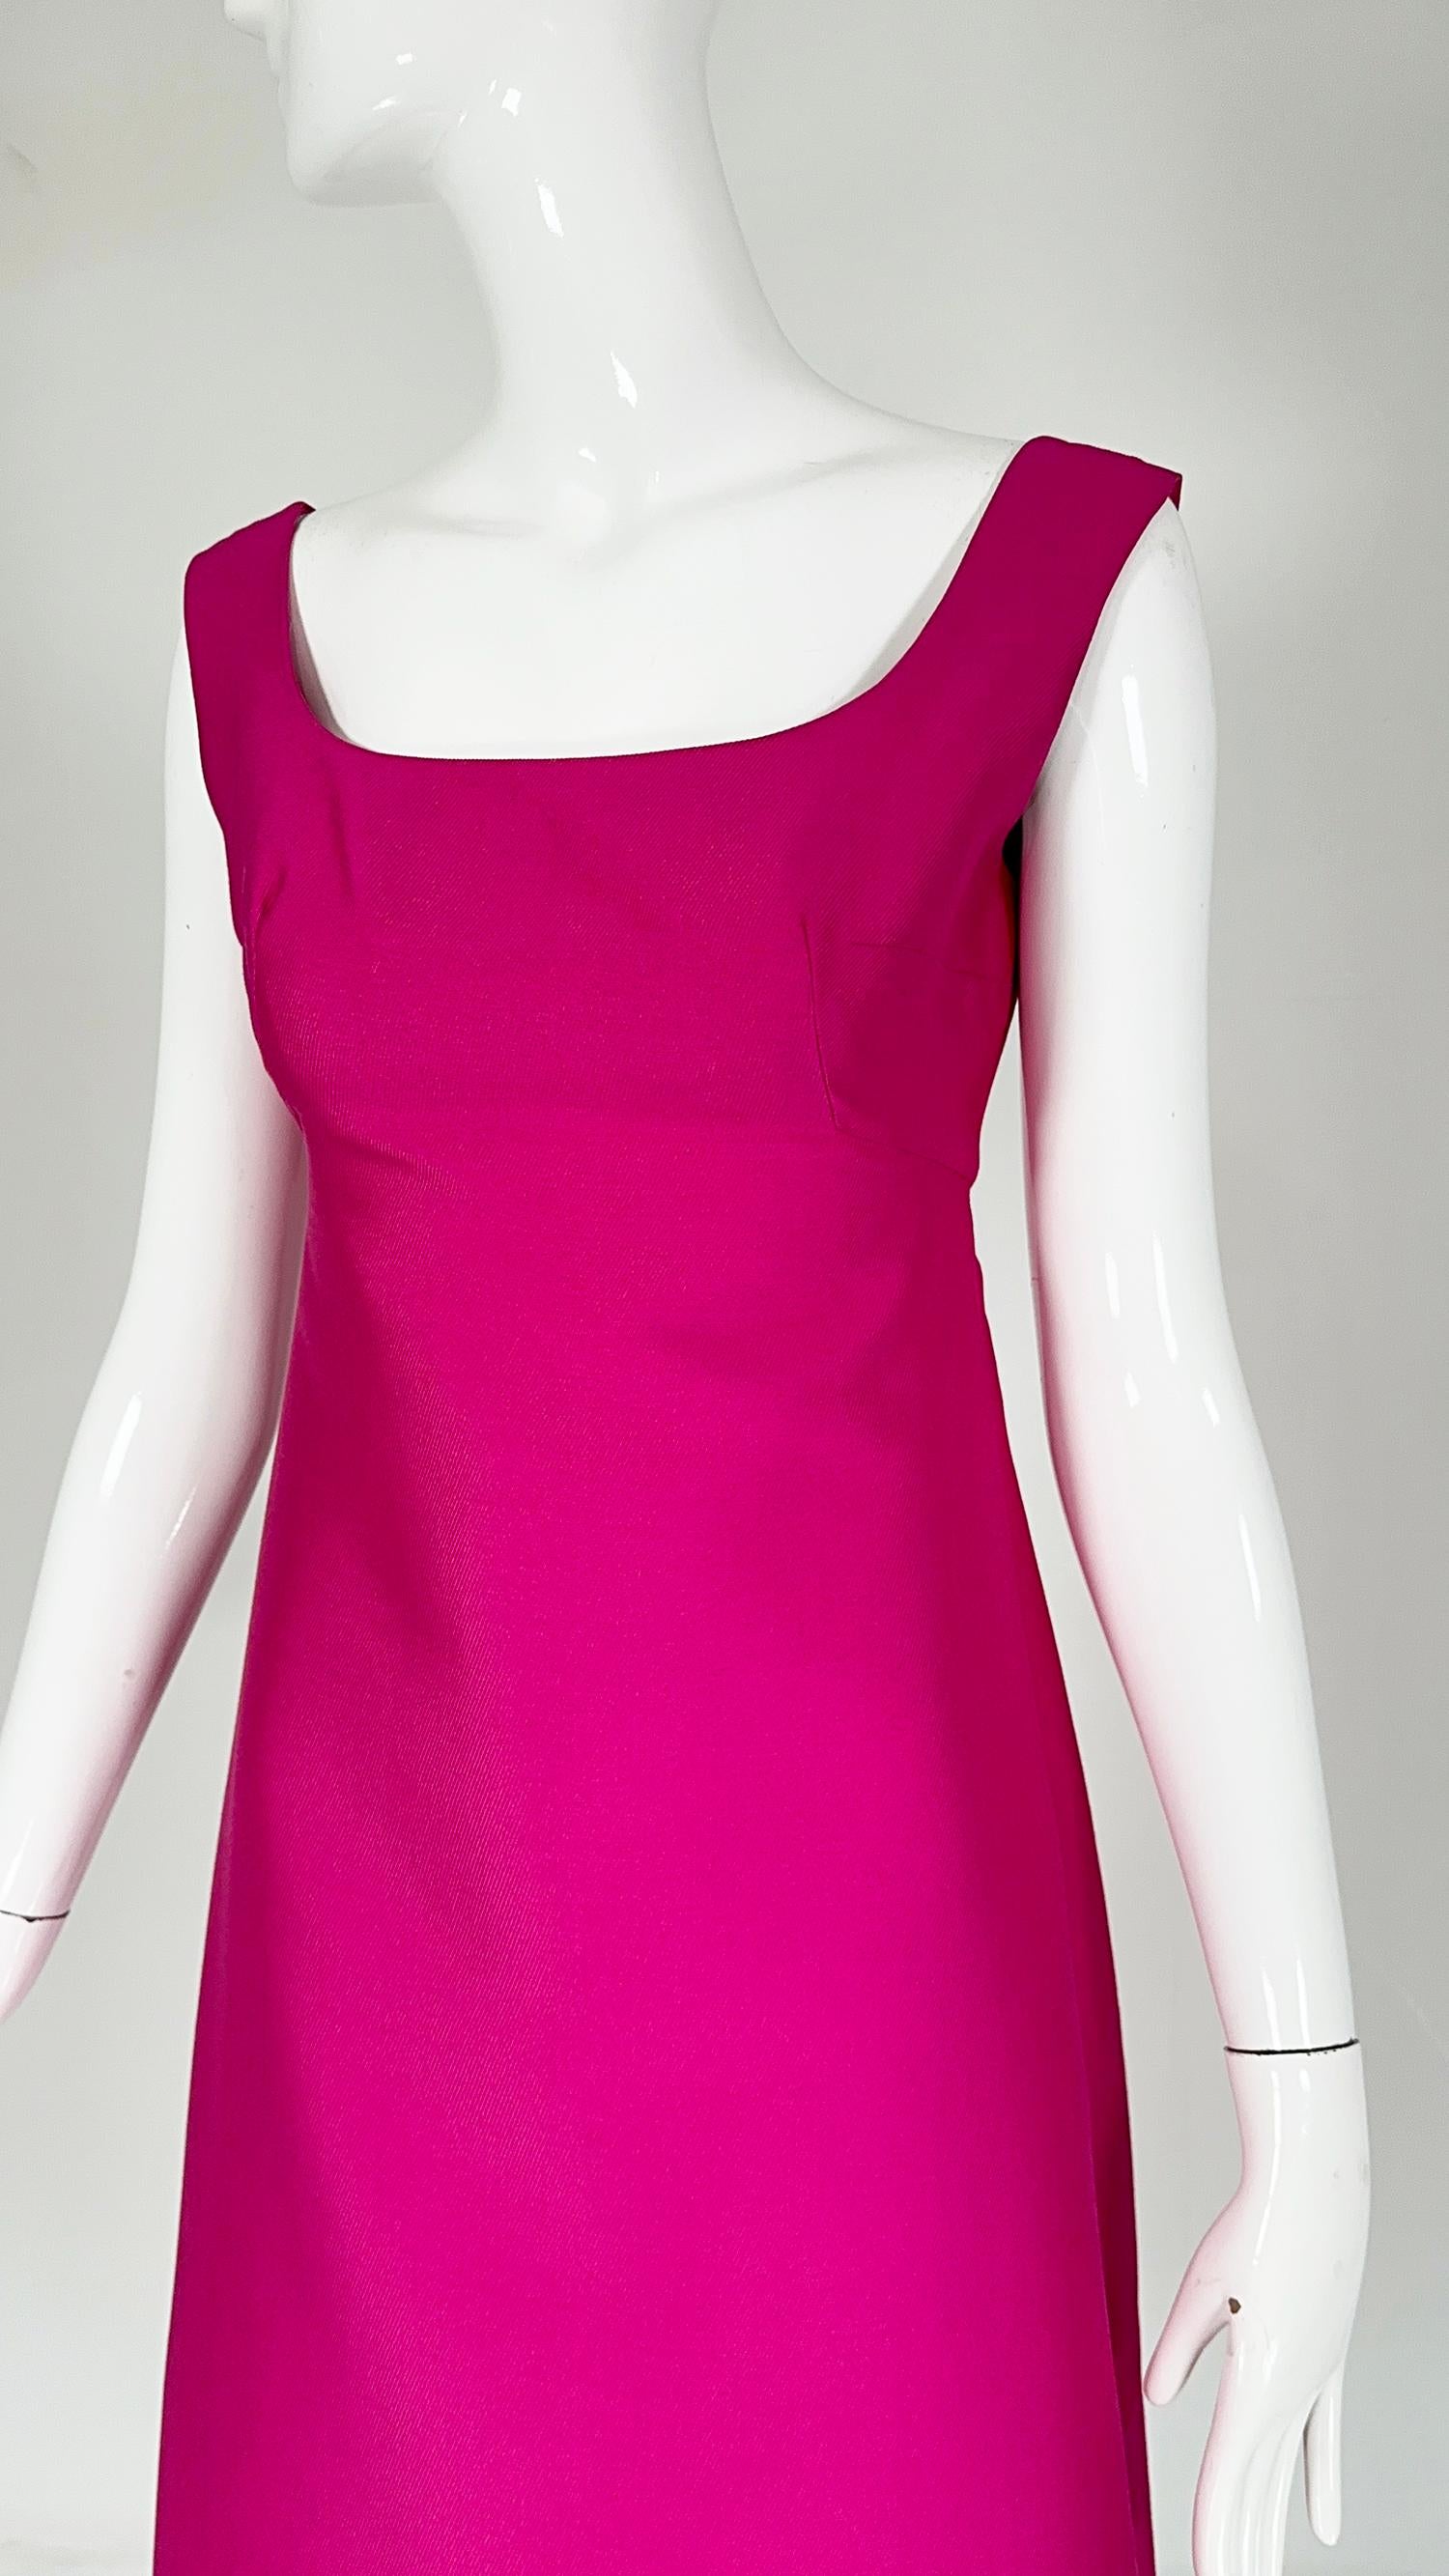 Malcolm Starr Fuchsia Pink Silk Twill Evening Dress Early 1960s For Sale 7